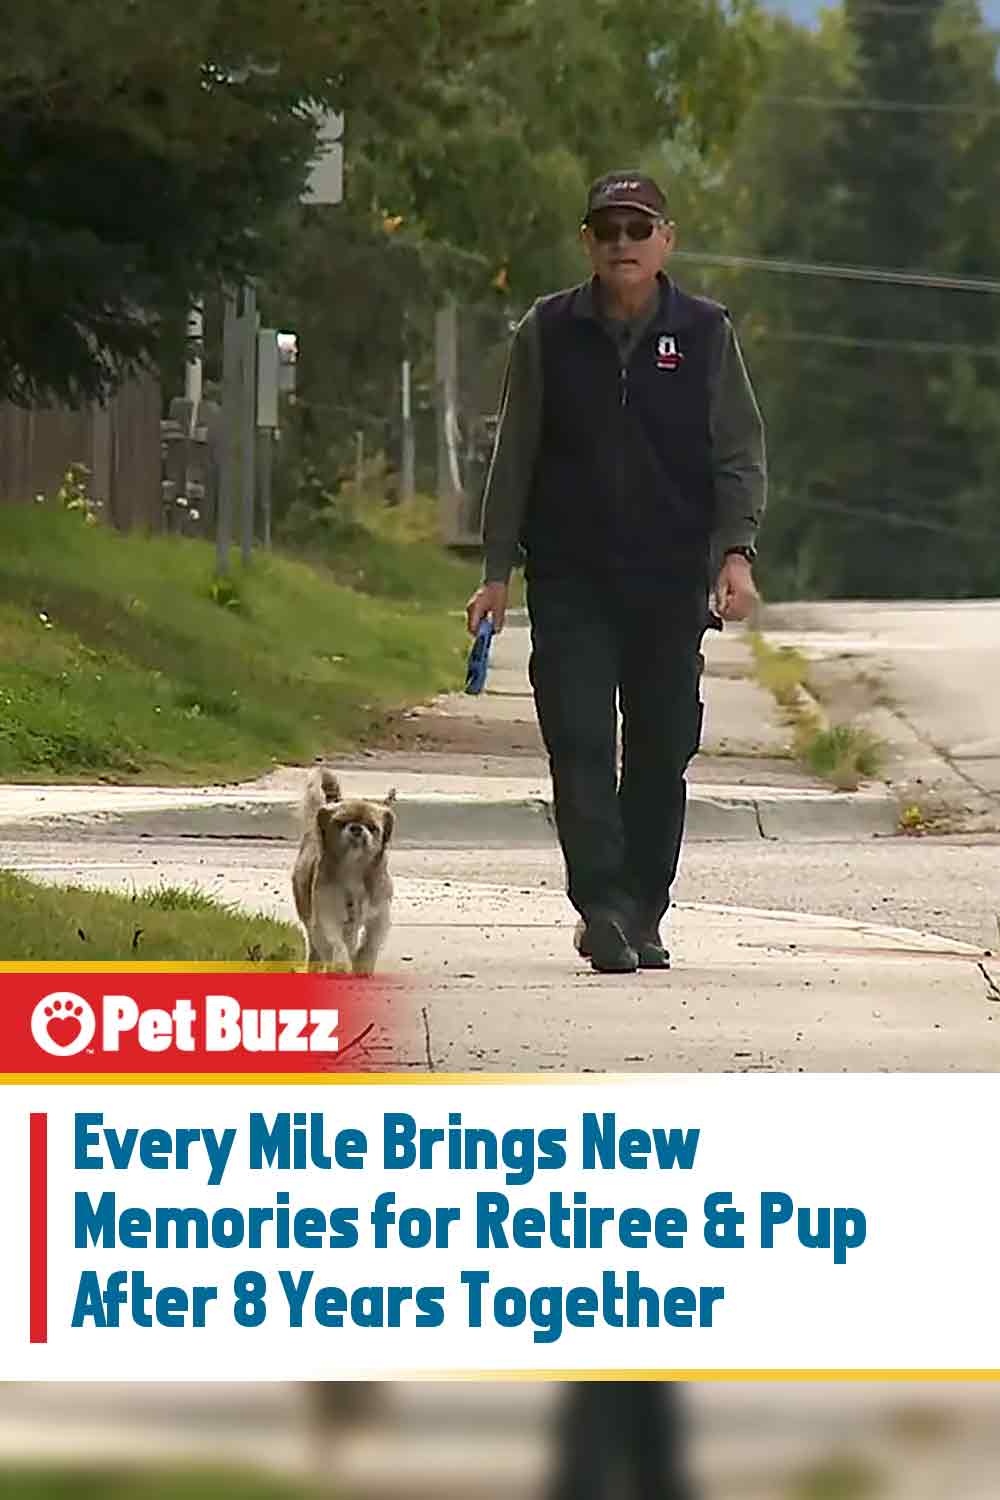 Every Mile Brings New Memories for Retiree & Pup After 8 Years Together